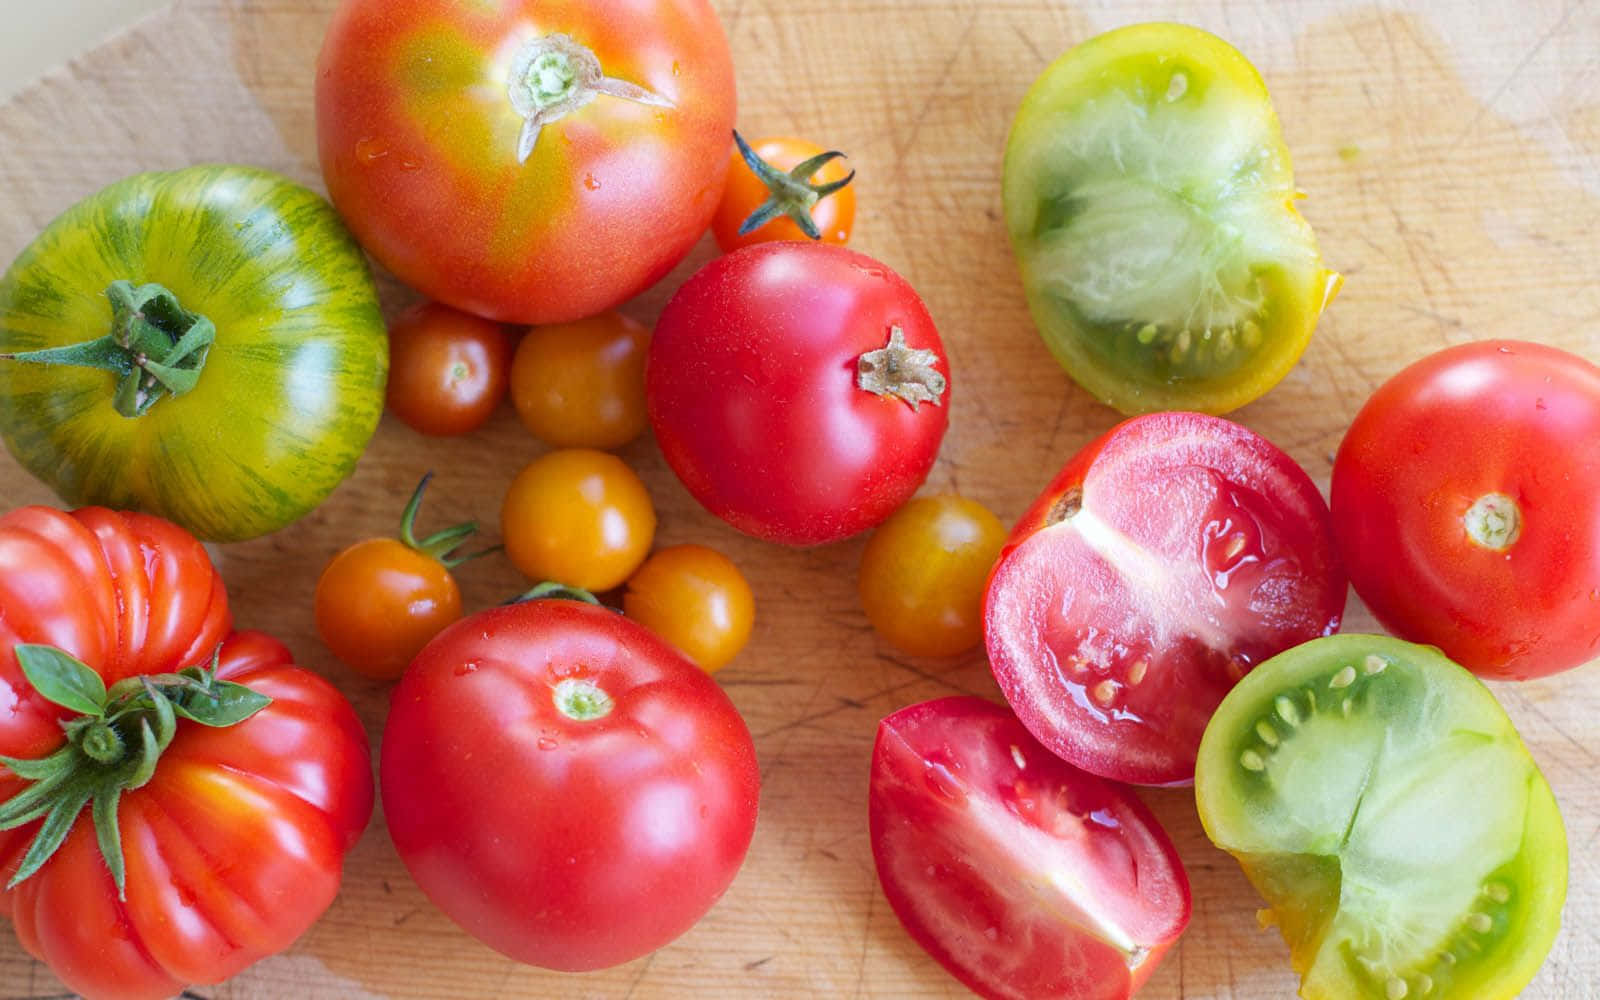 "Nom nom! Ripe and juicy red tomatoes ready to be enjoyed!"